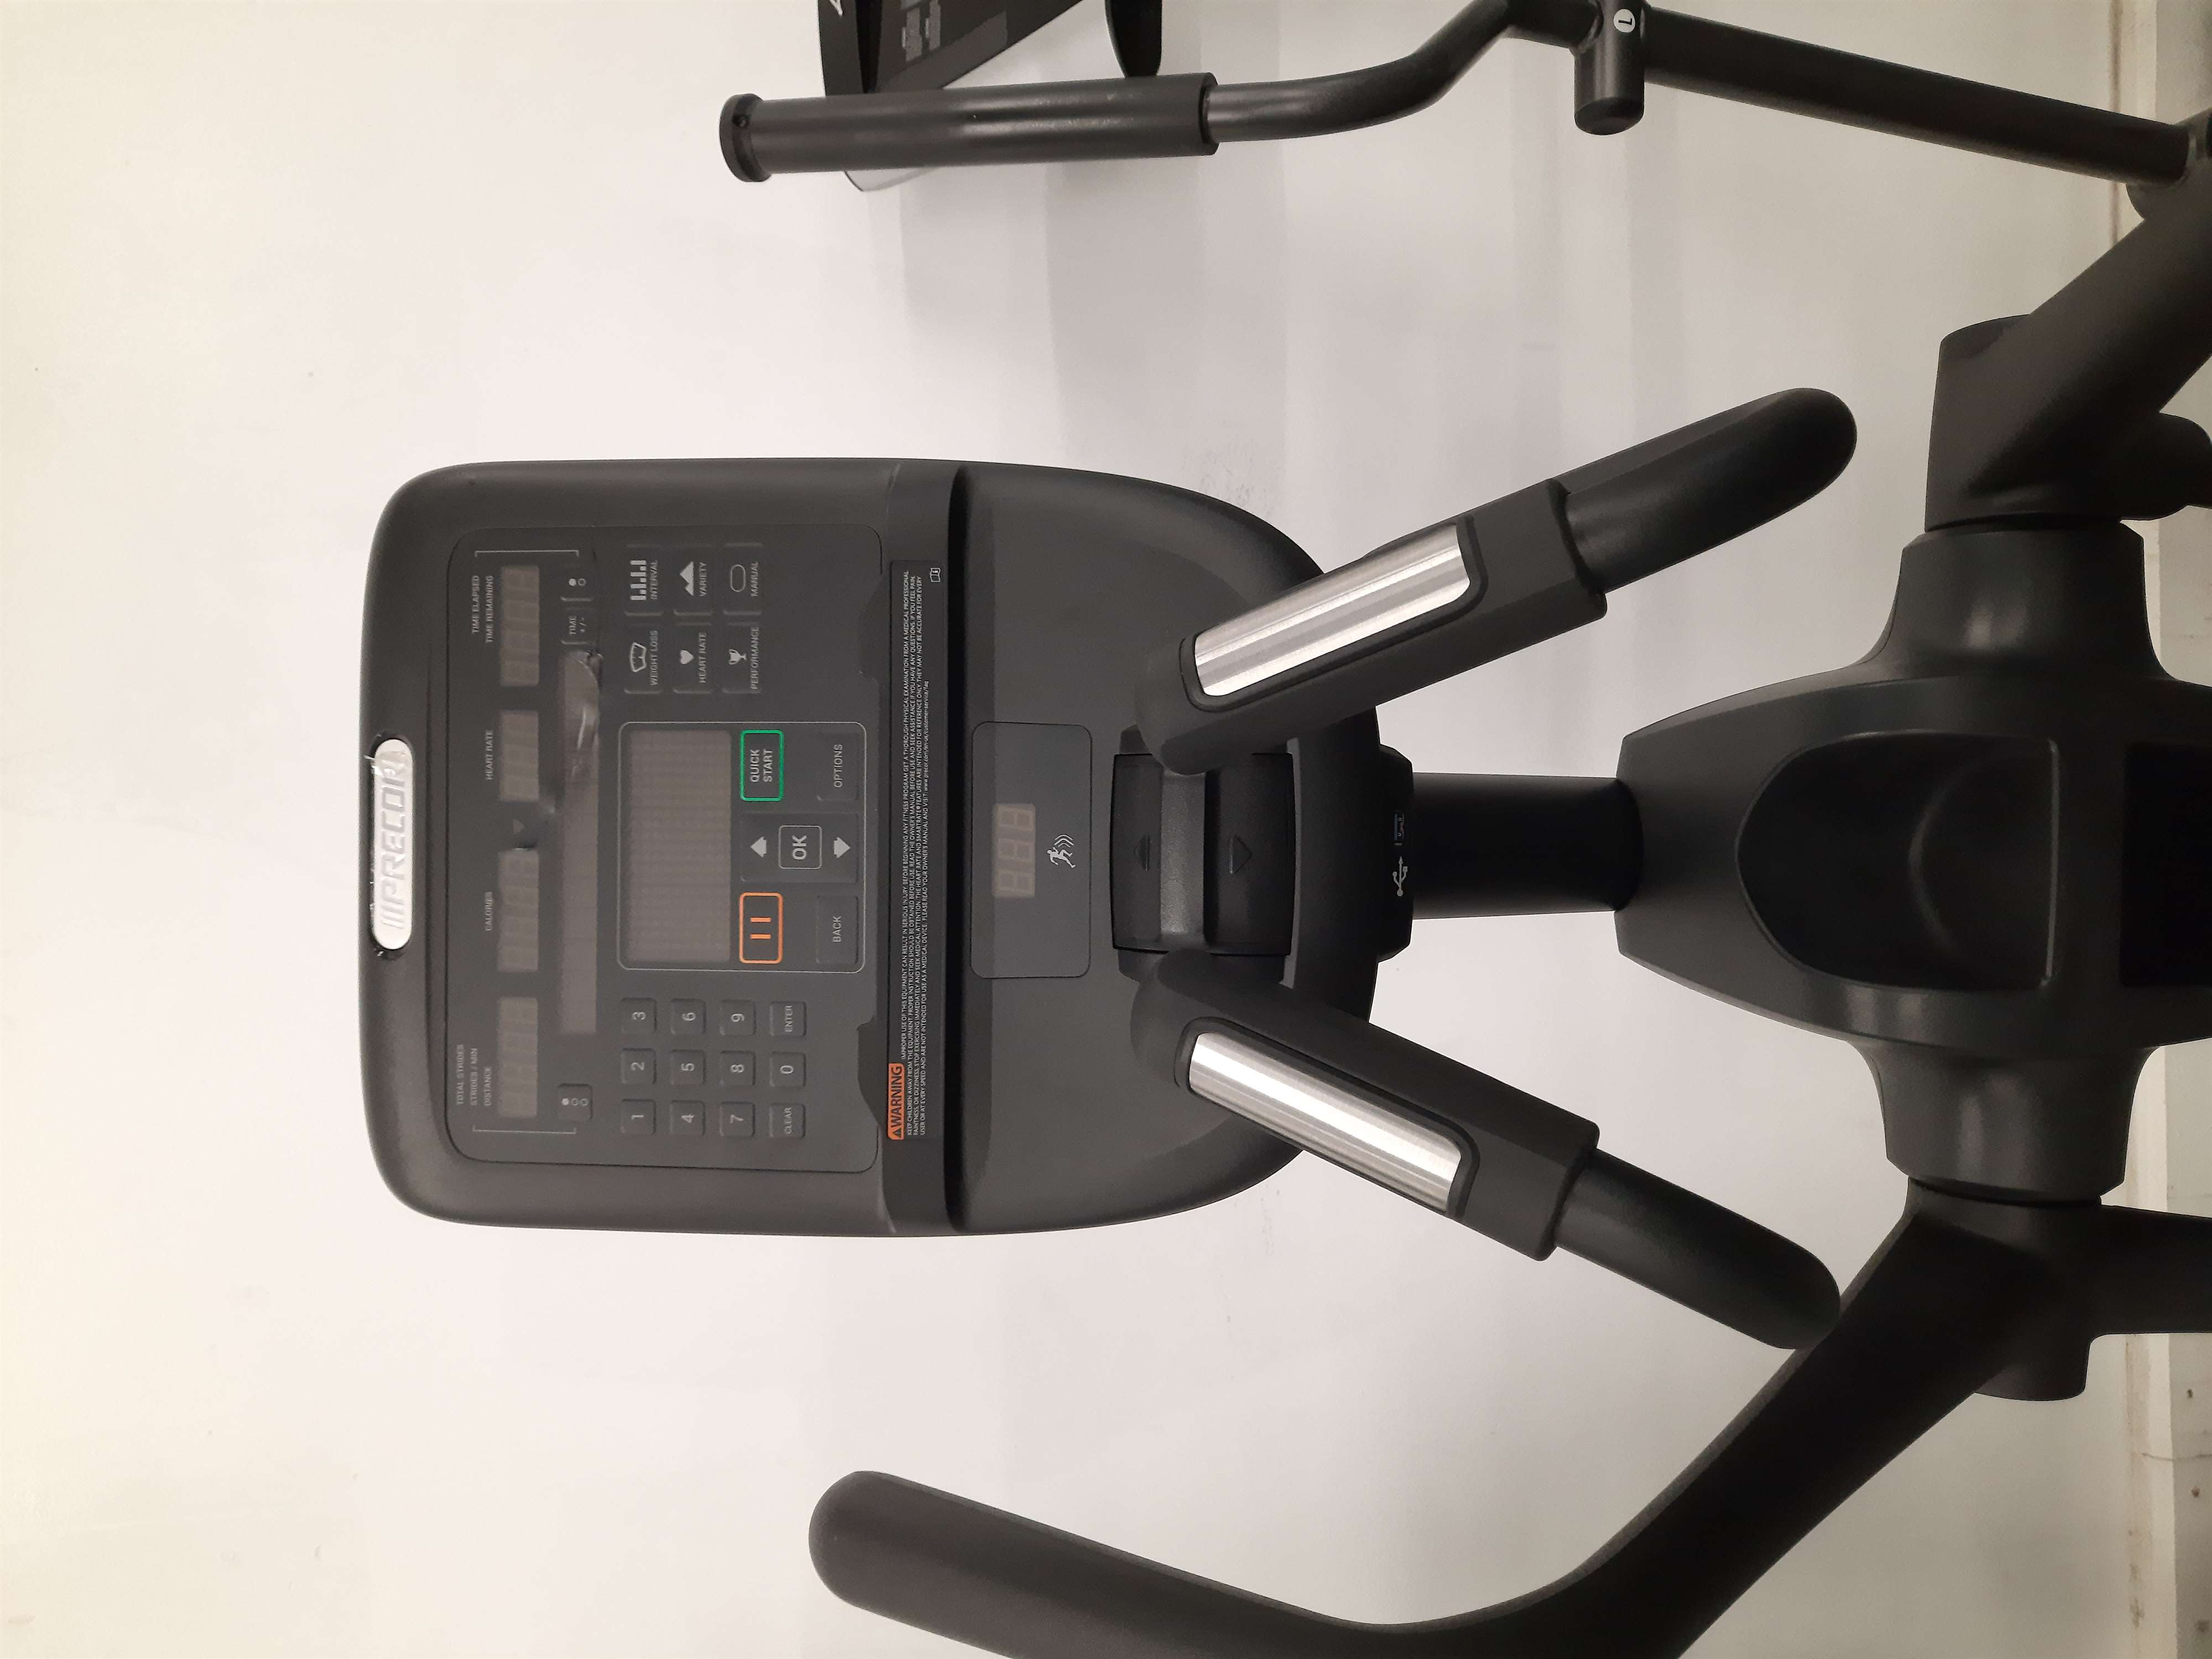 New(other) Precor EFX 731 - P31 Console  (Blemished) AAPA - EFX 700-18 Elliptical